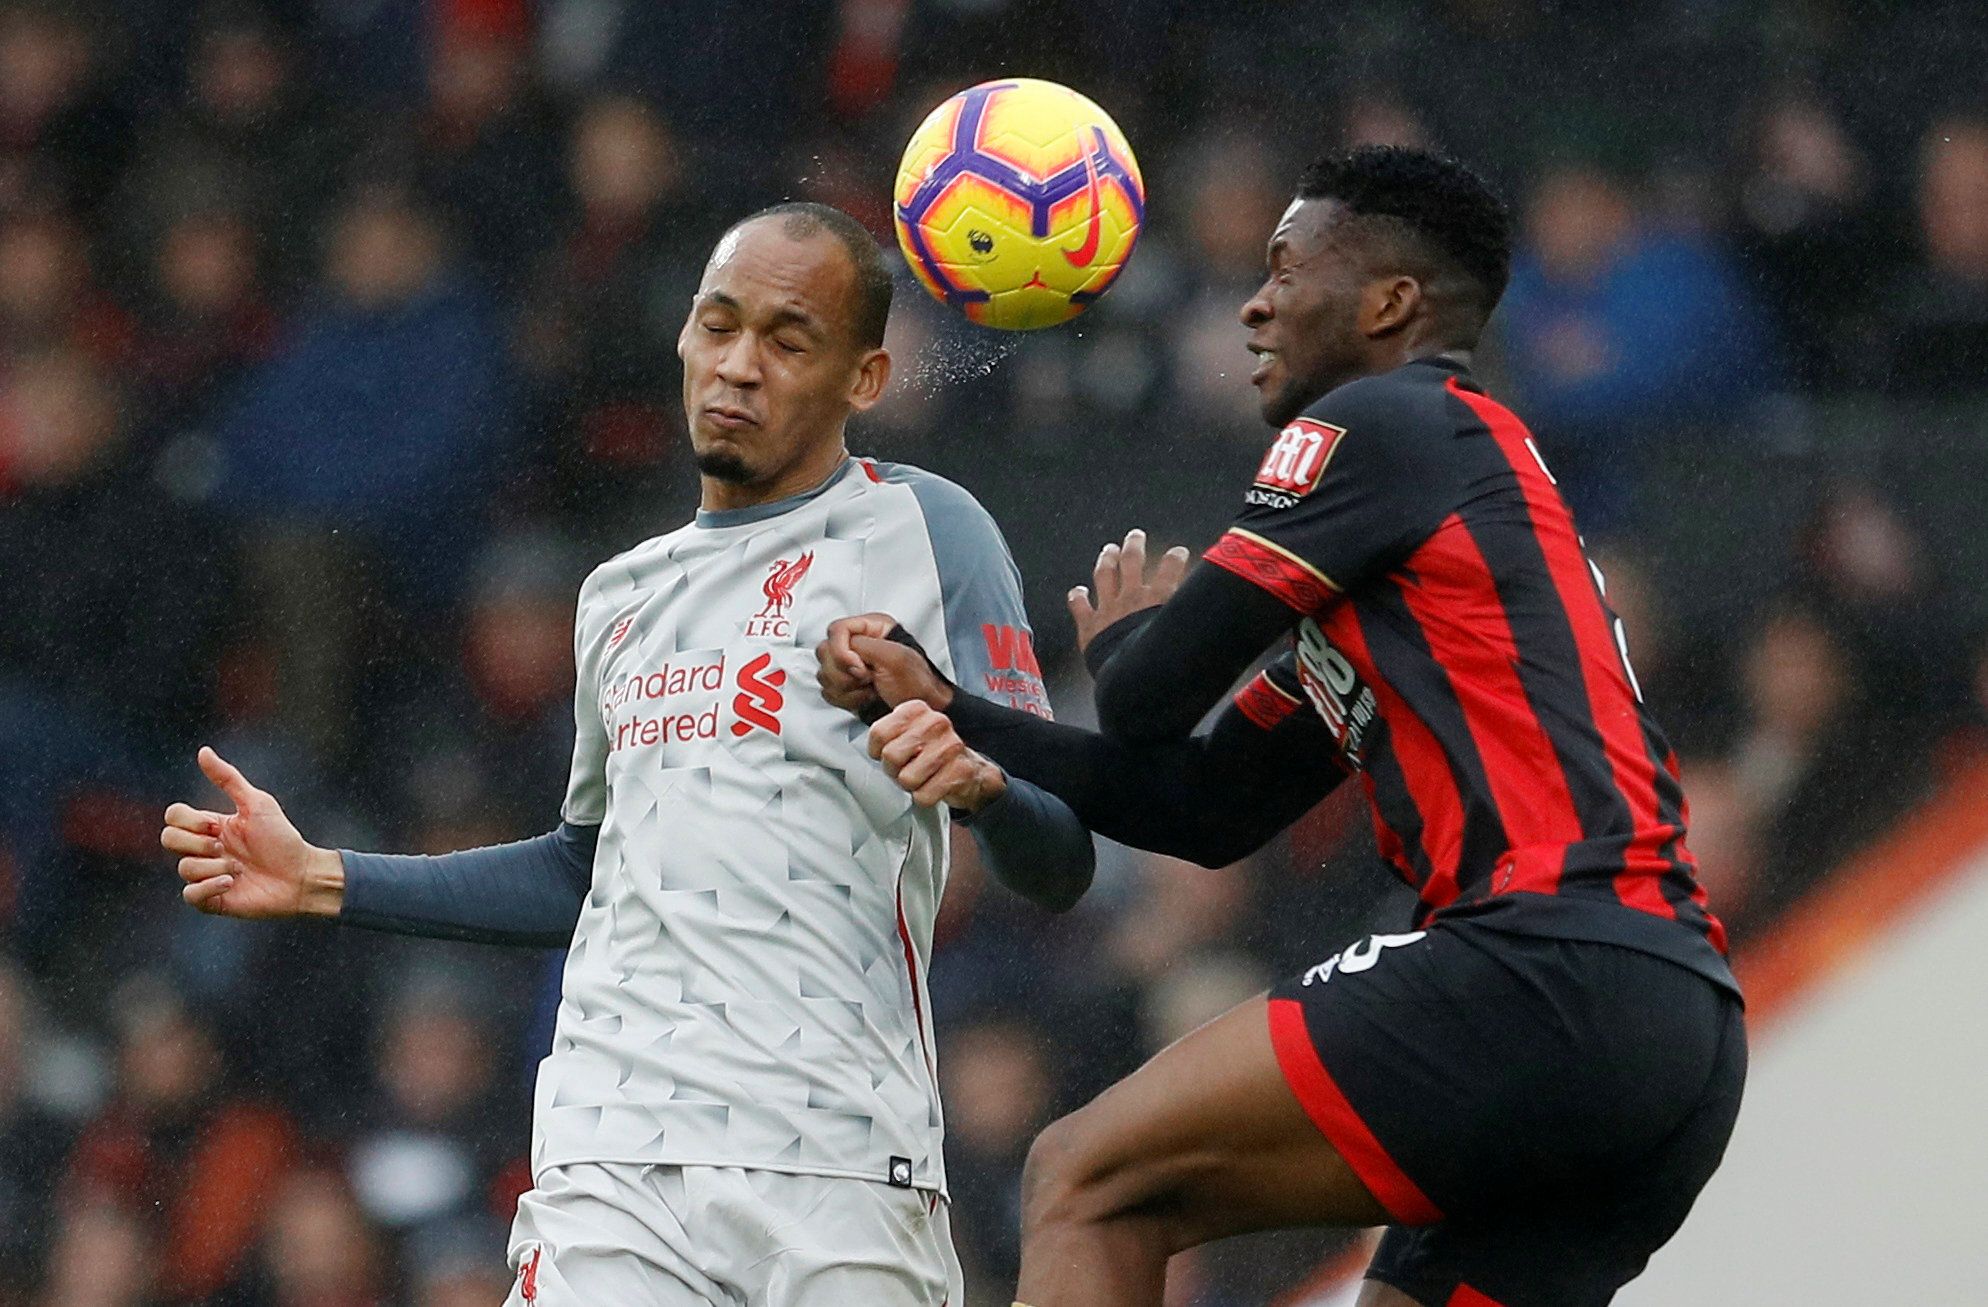 Soccer Football - Premier League - AFC Bournemouth v Liverpool - Vitality Stadium, Bournemouth, Britain - December 8, 2018  Liverpool's Fabinho in action with Bournemouth's Jefferson Lerma   REUTERS/Peter Nicholls  EDITORIAL USE ONLY. No use with unauthorized audio, video, data, fixture lists, club/league logos or 